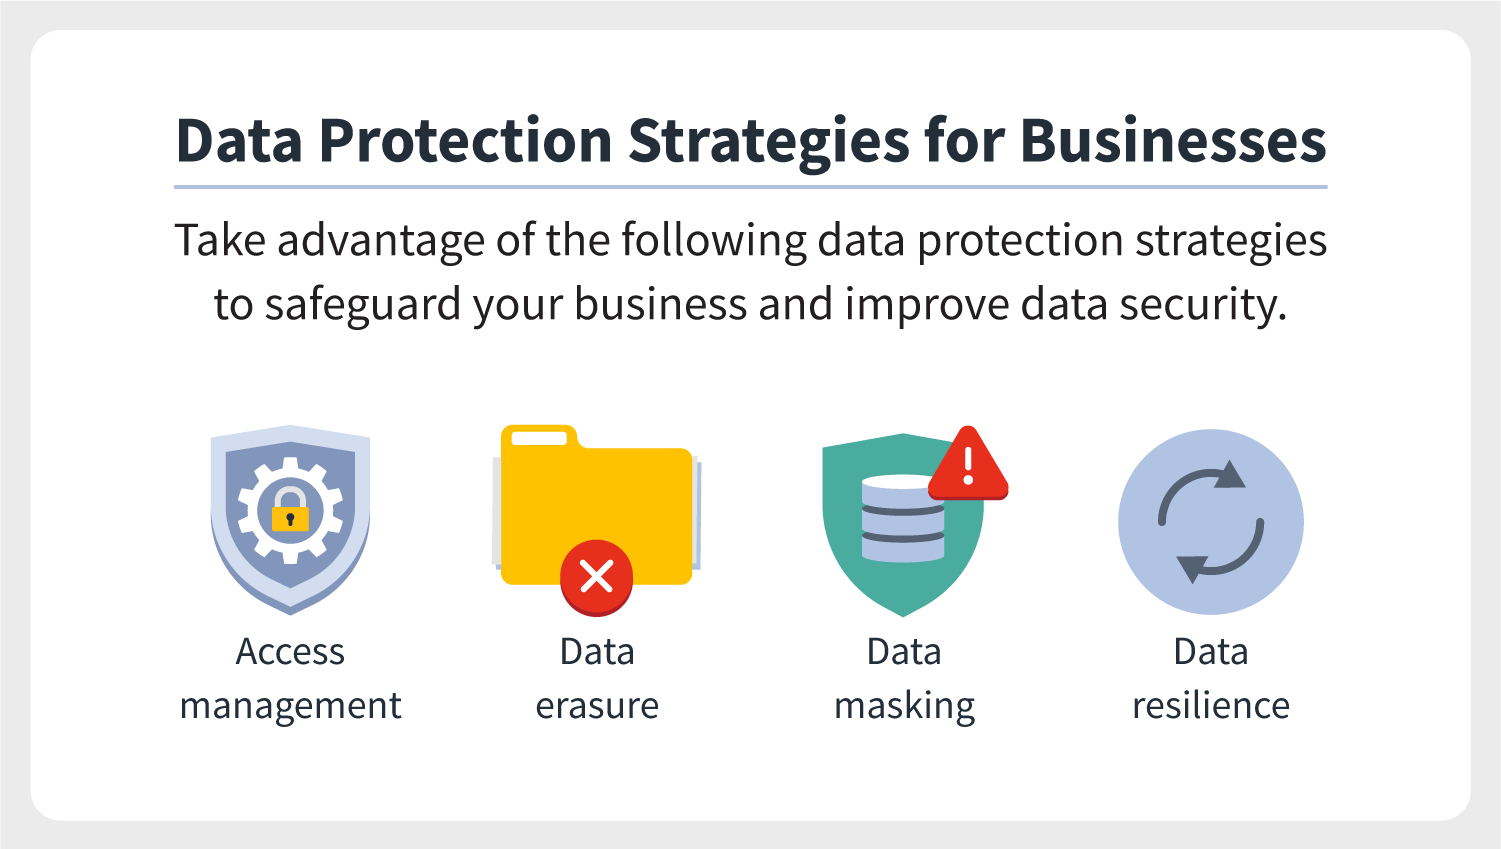 Four illustrations accompany data protection strategies for businesses to help protect the confidential data of their company and customers. 